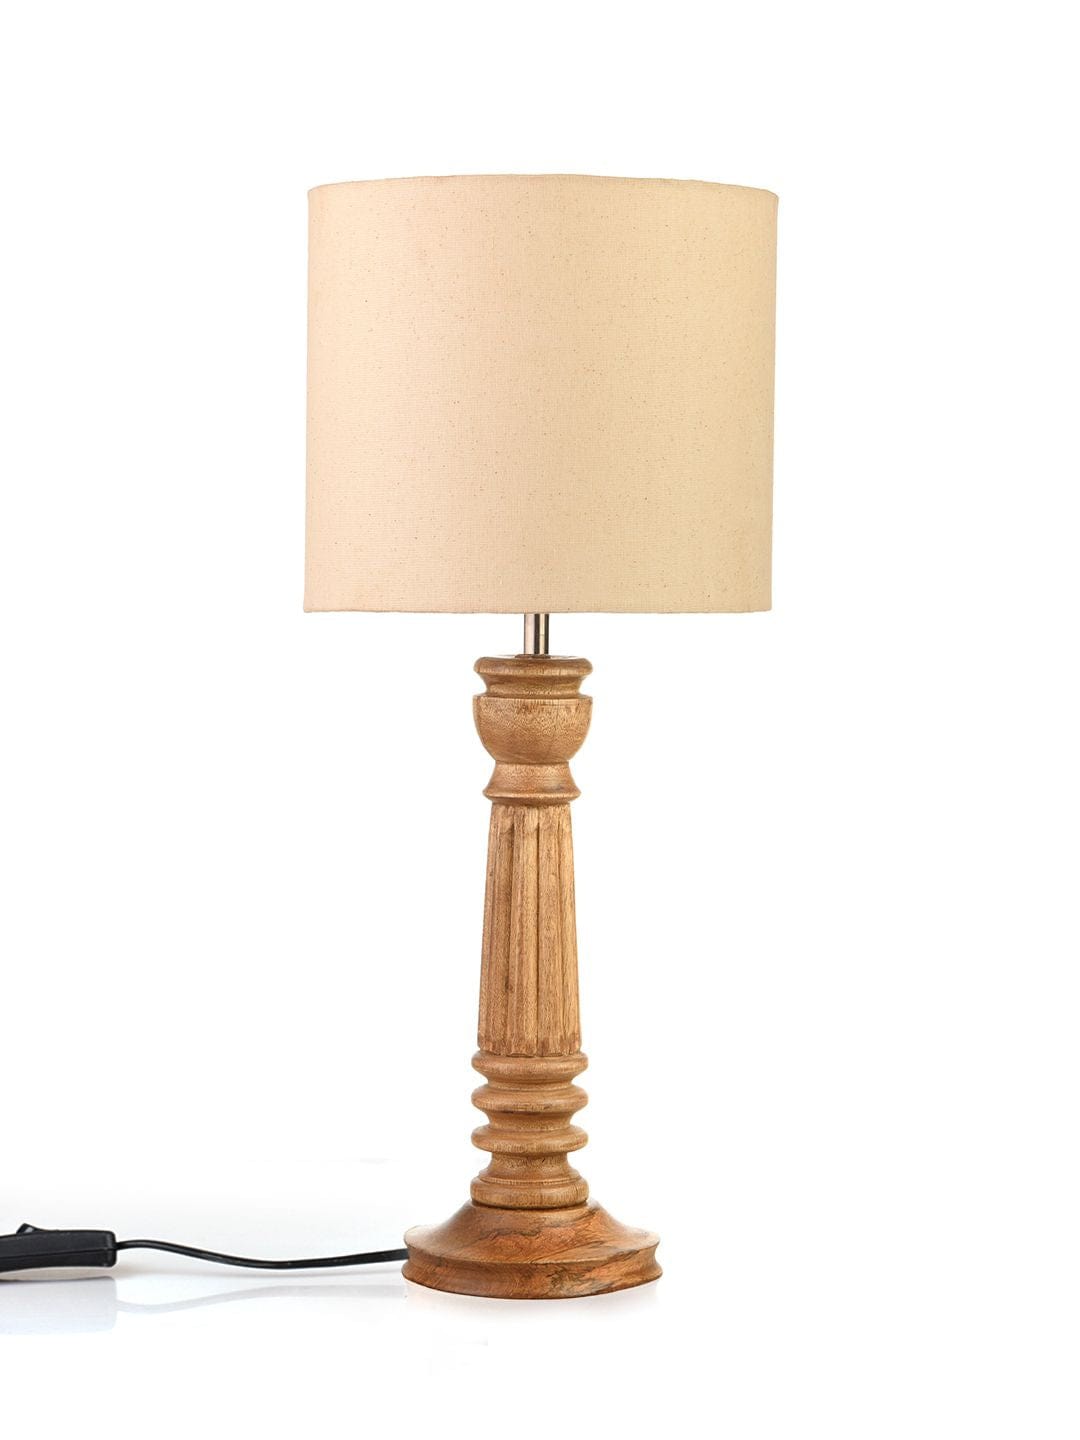 Pillar Brown Lamp with White Cotton Shade